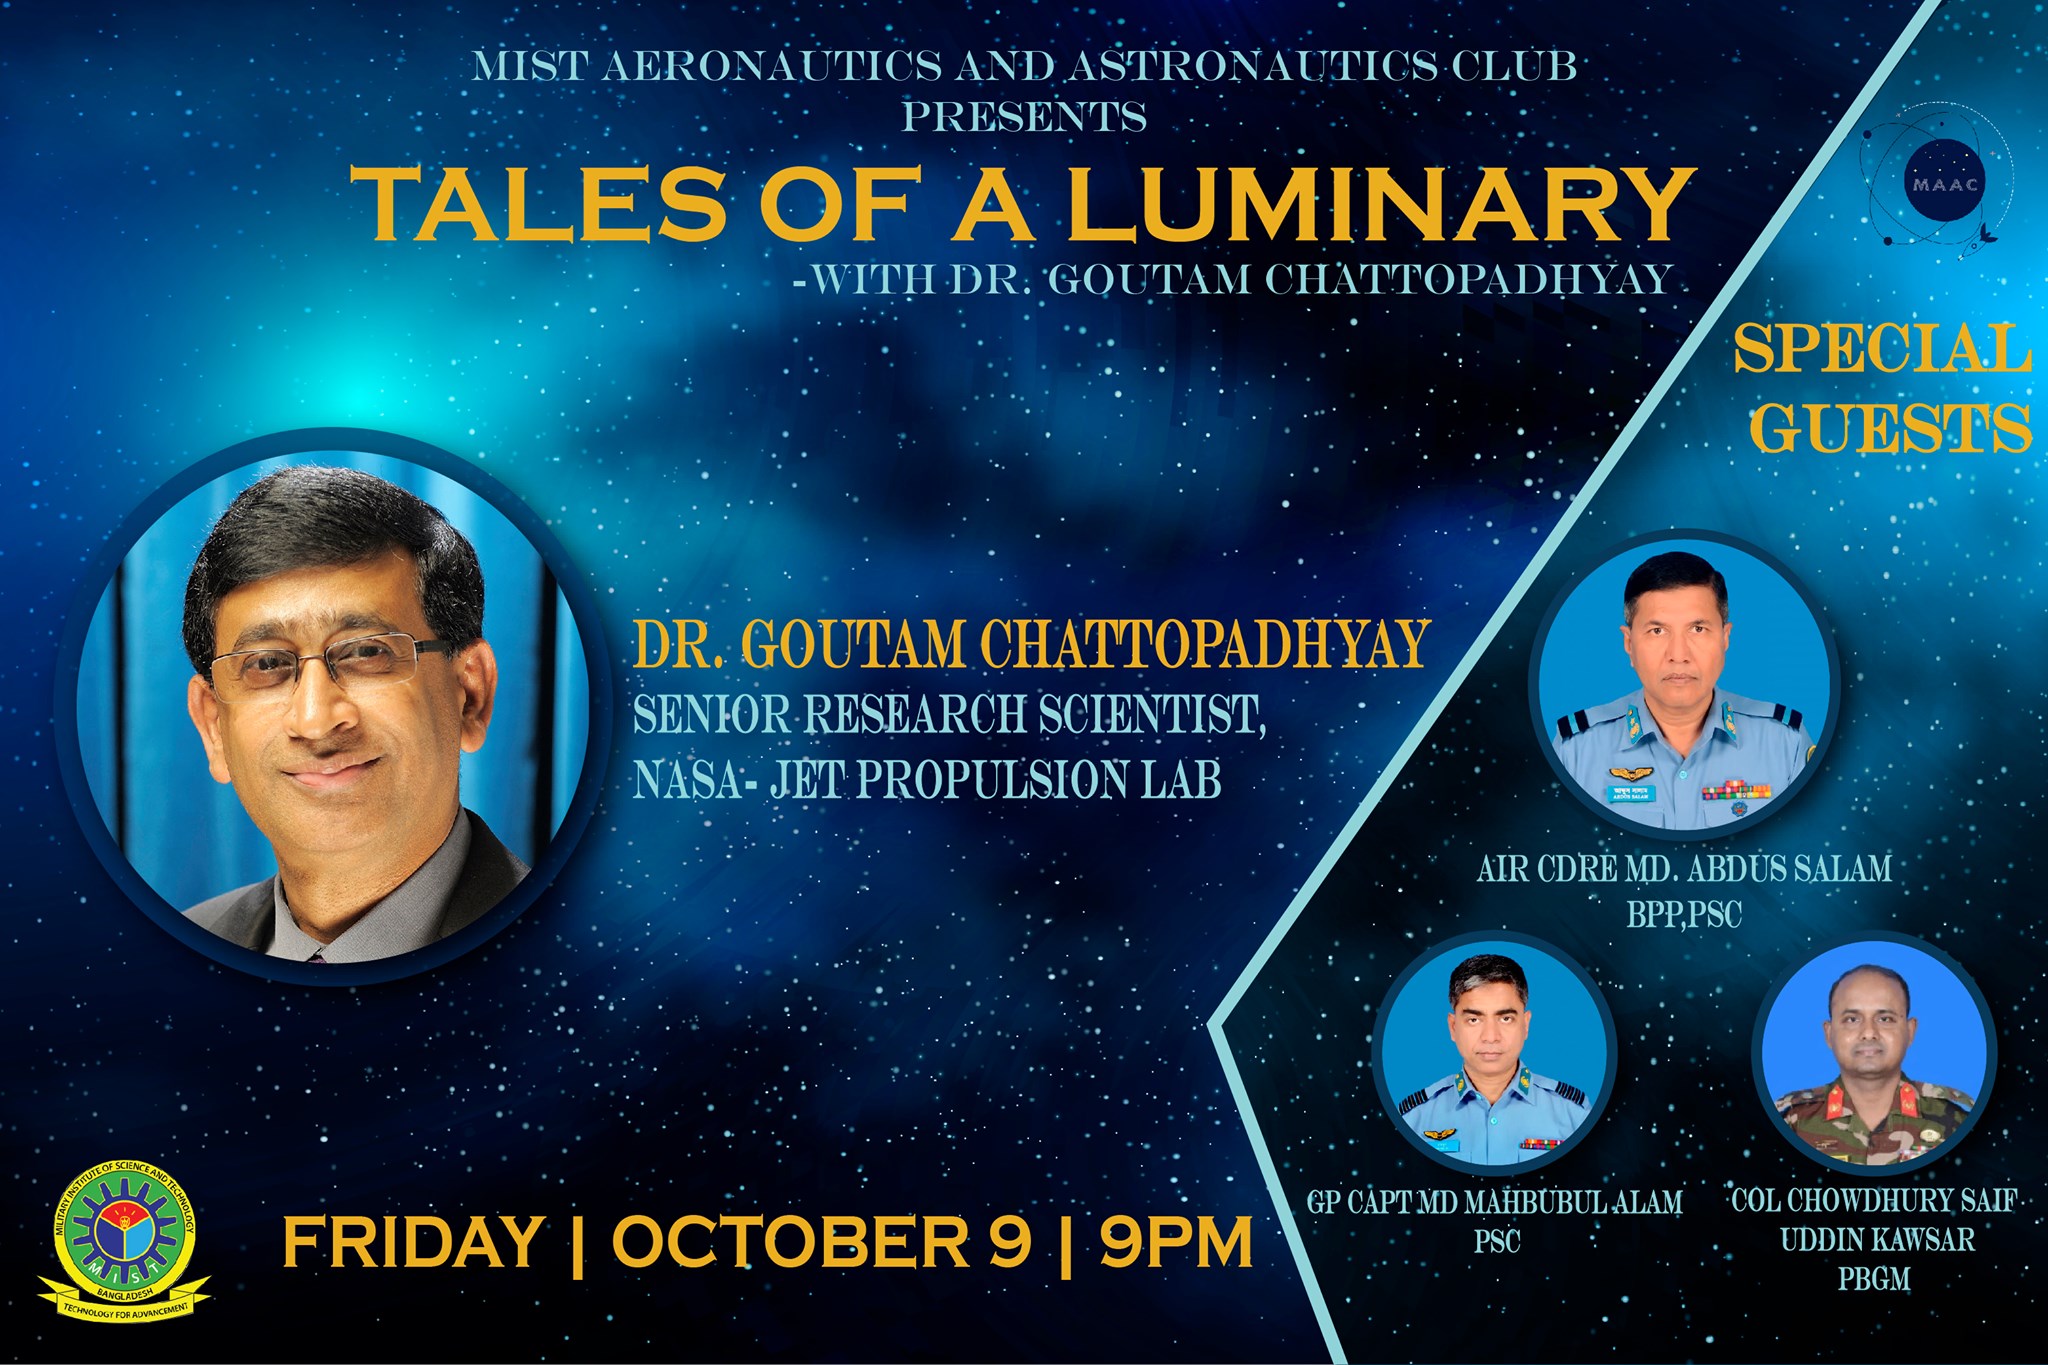 Online Event "Tales of a Luminary" Organized by MAAC